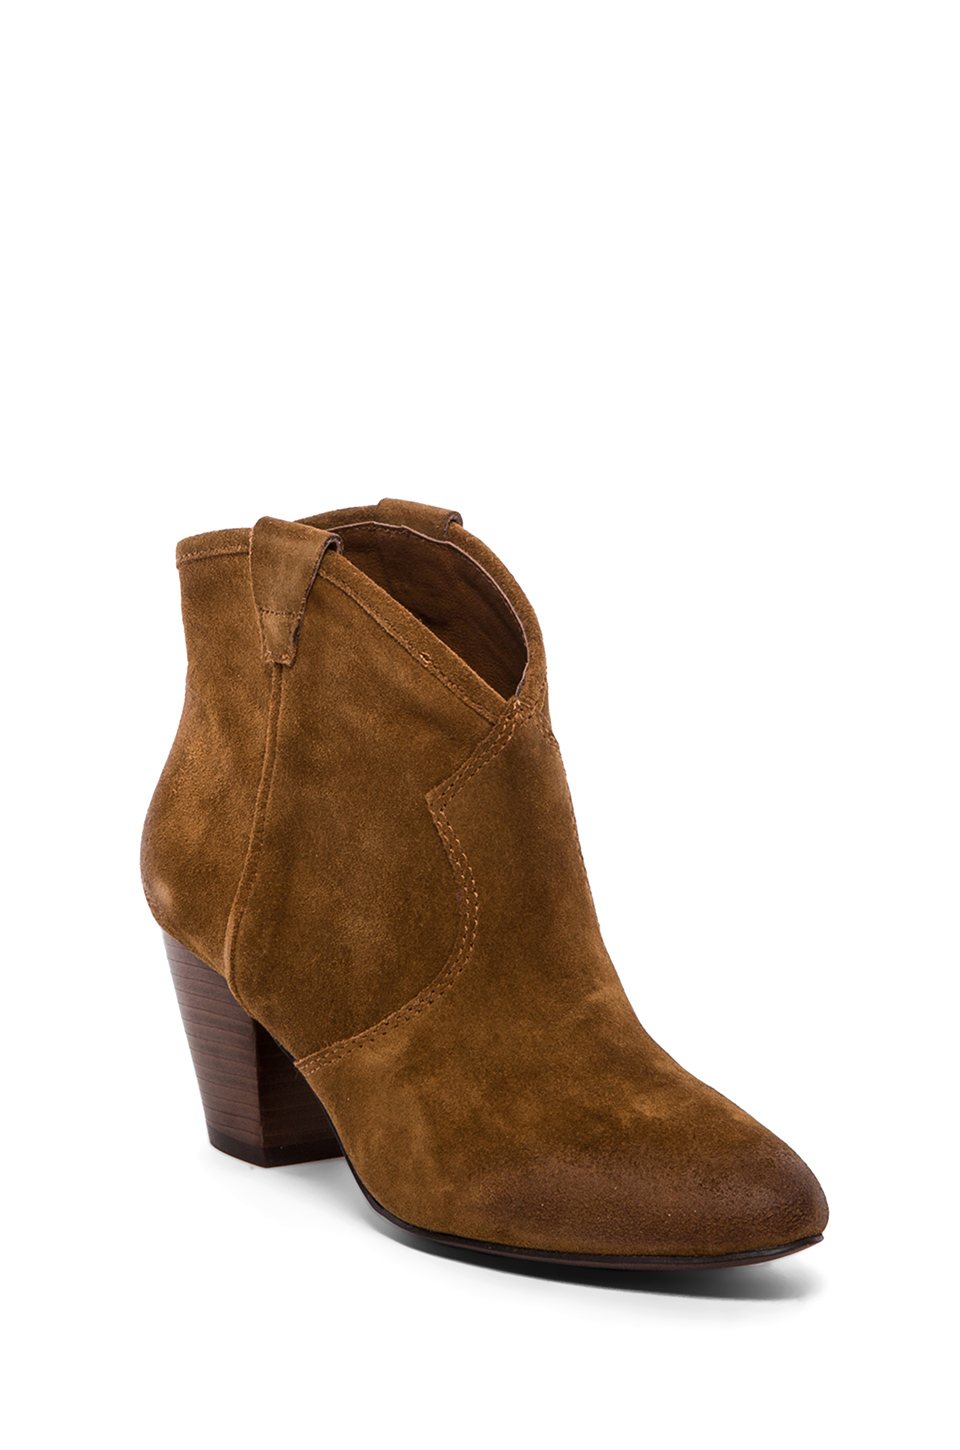 Lyst - Ash Jalouse Bootie in Brown